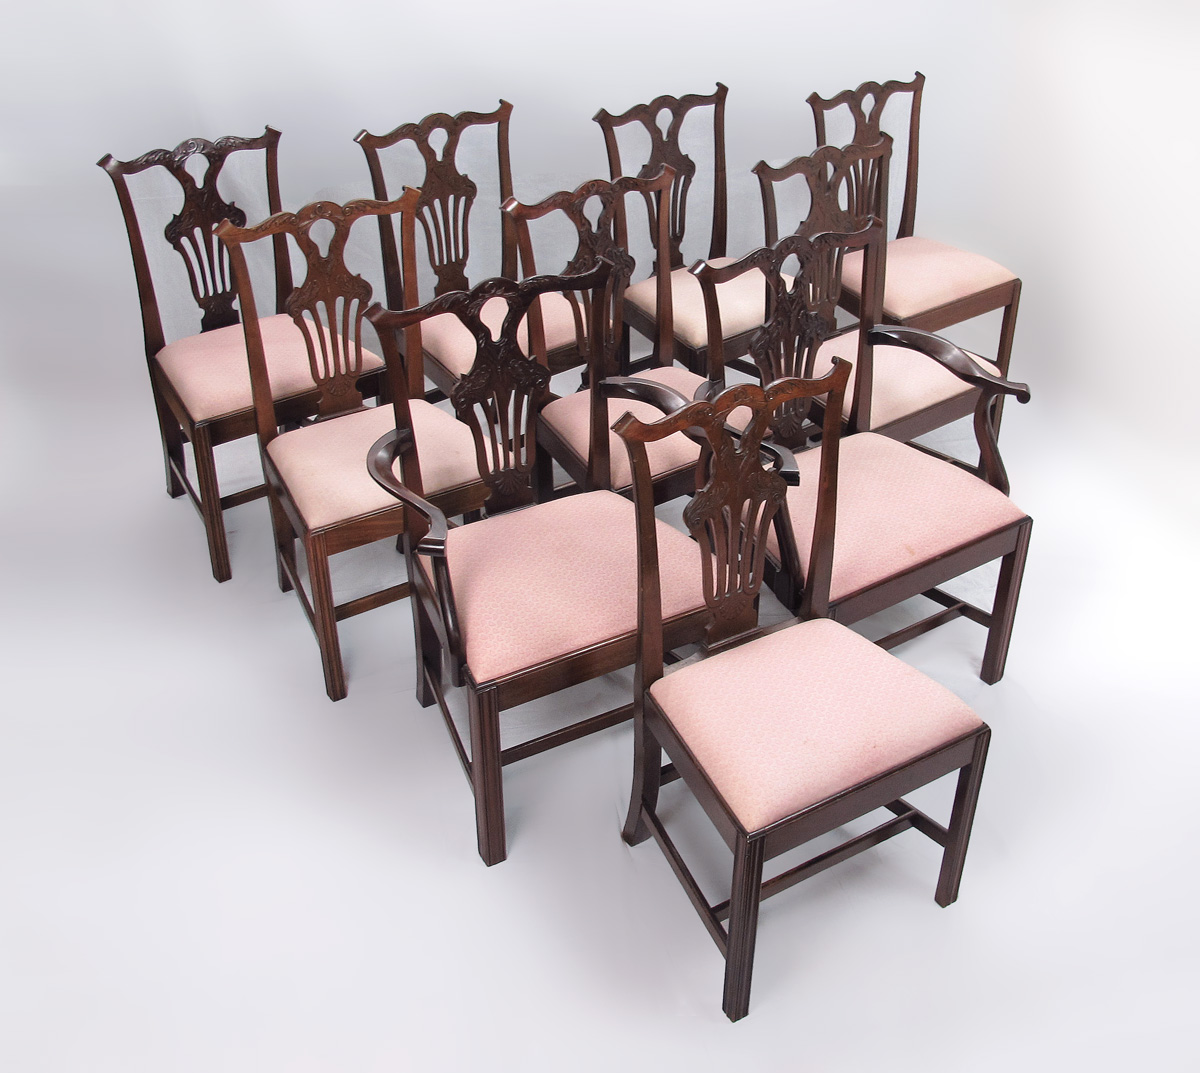 SET OF 10 MAHOGANY CHIPPENDALE